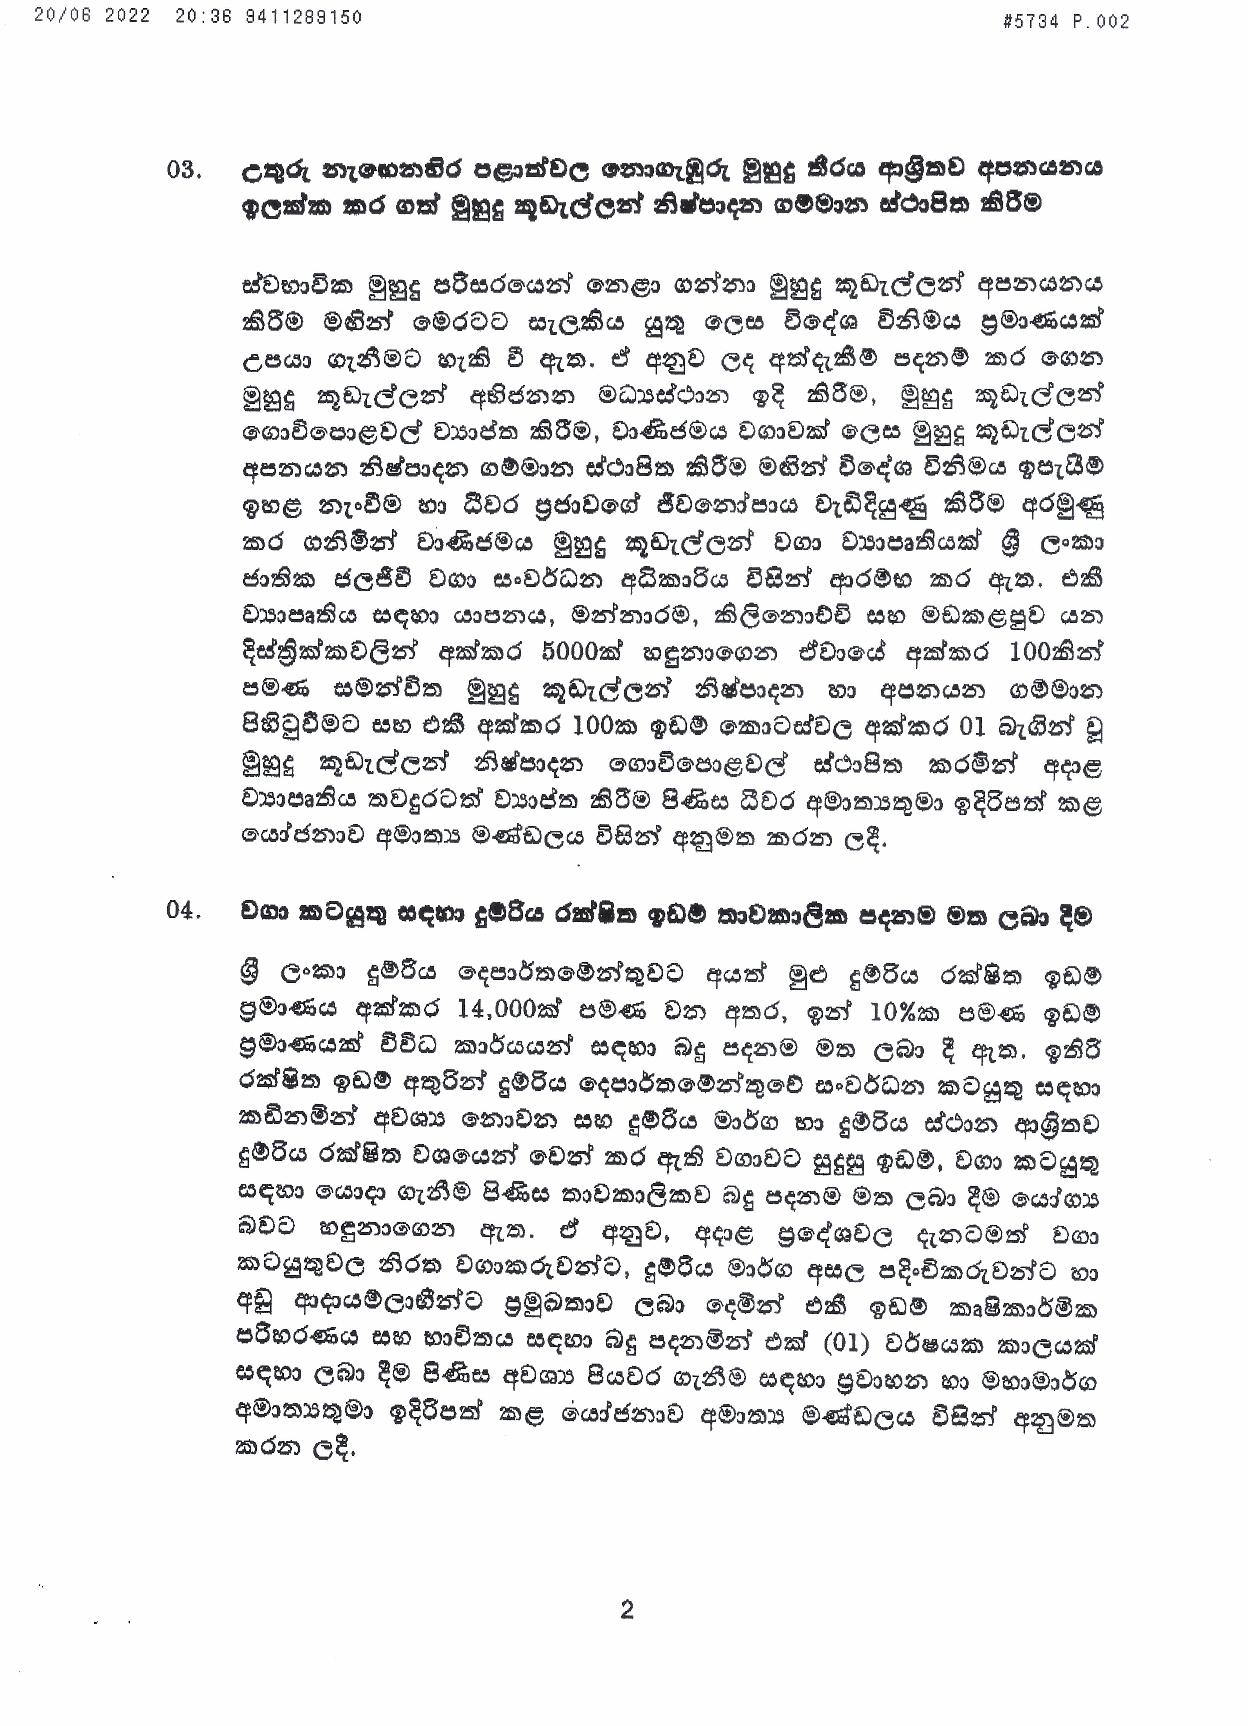 Cabinet Decision on 20.06.2022 page 002